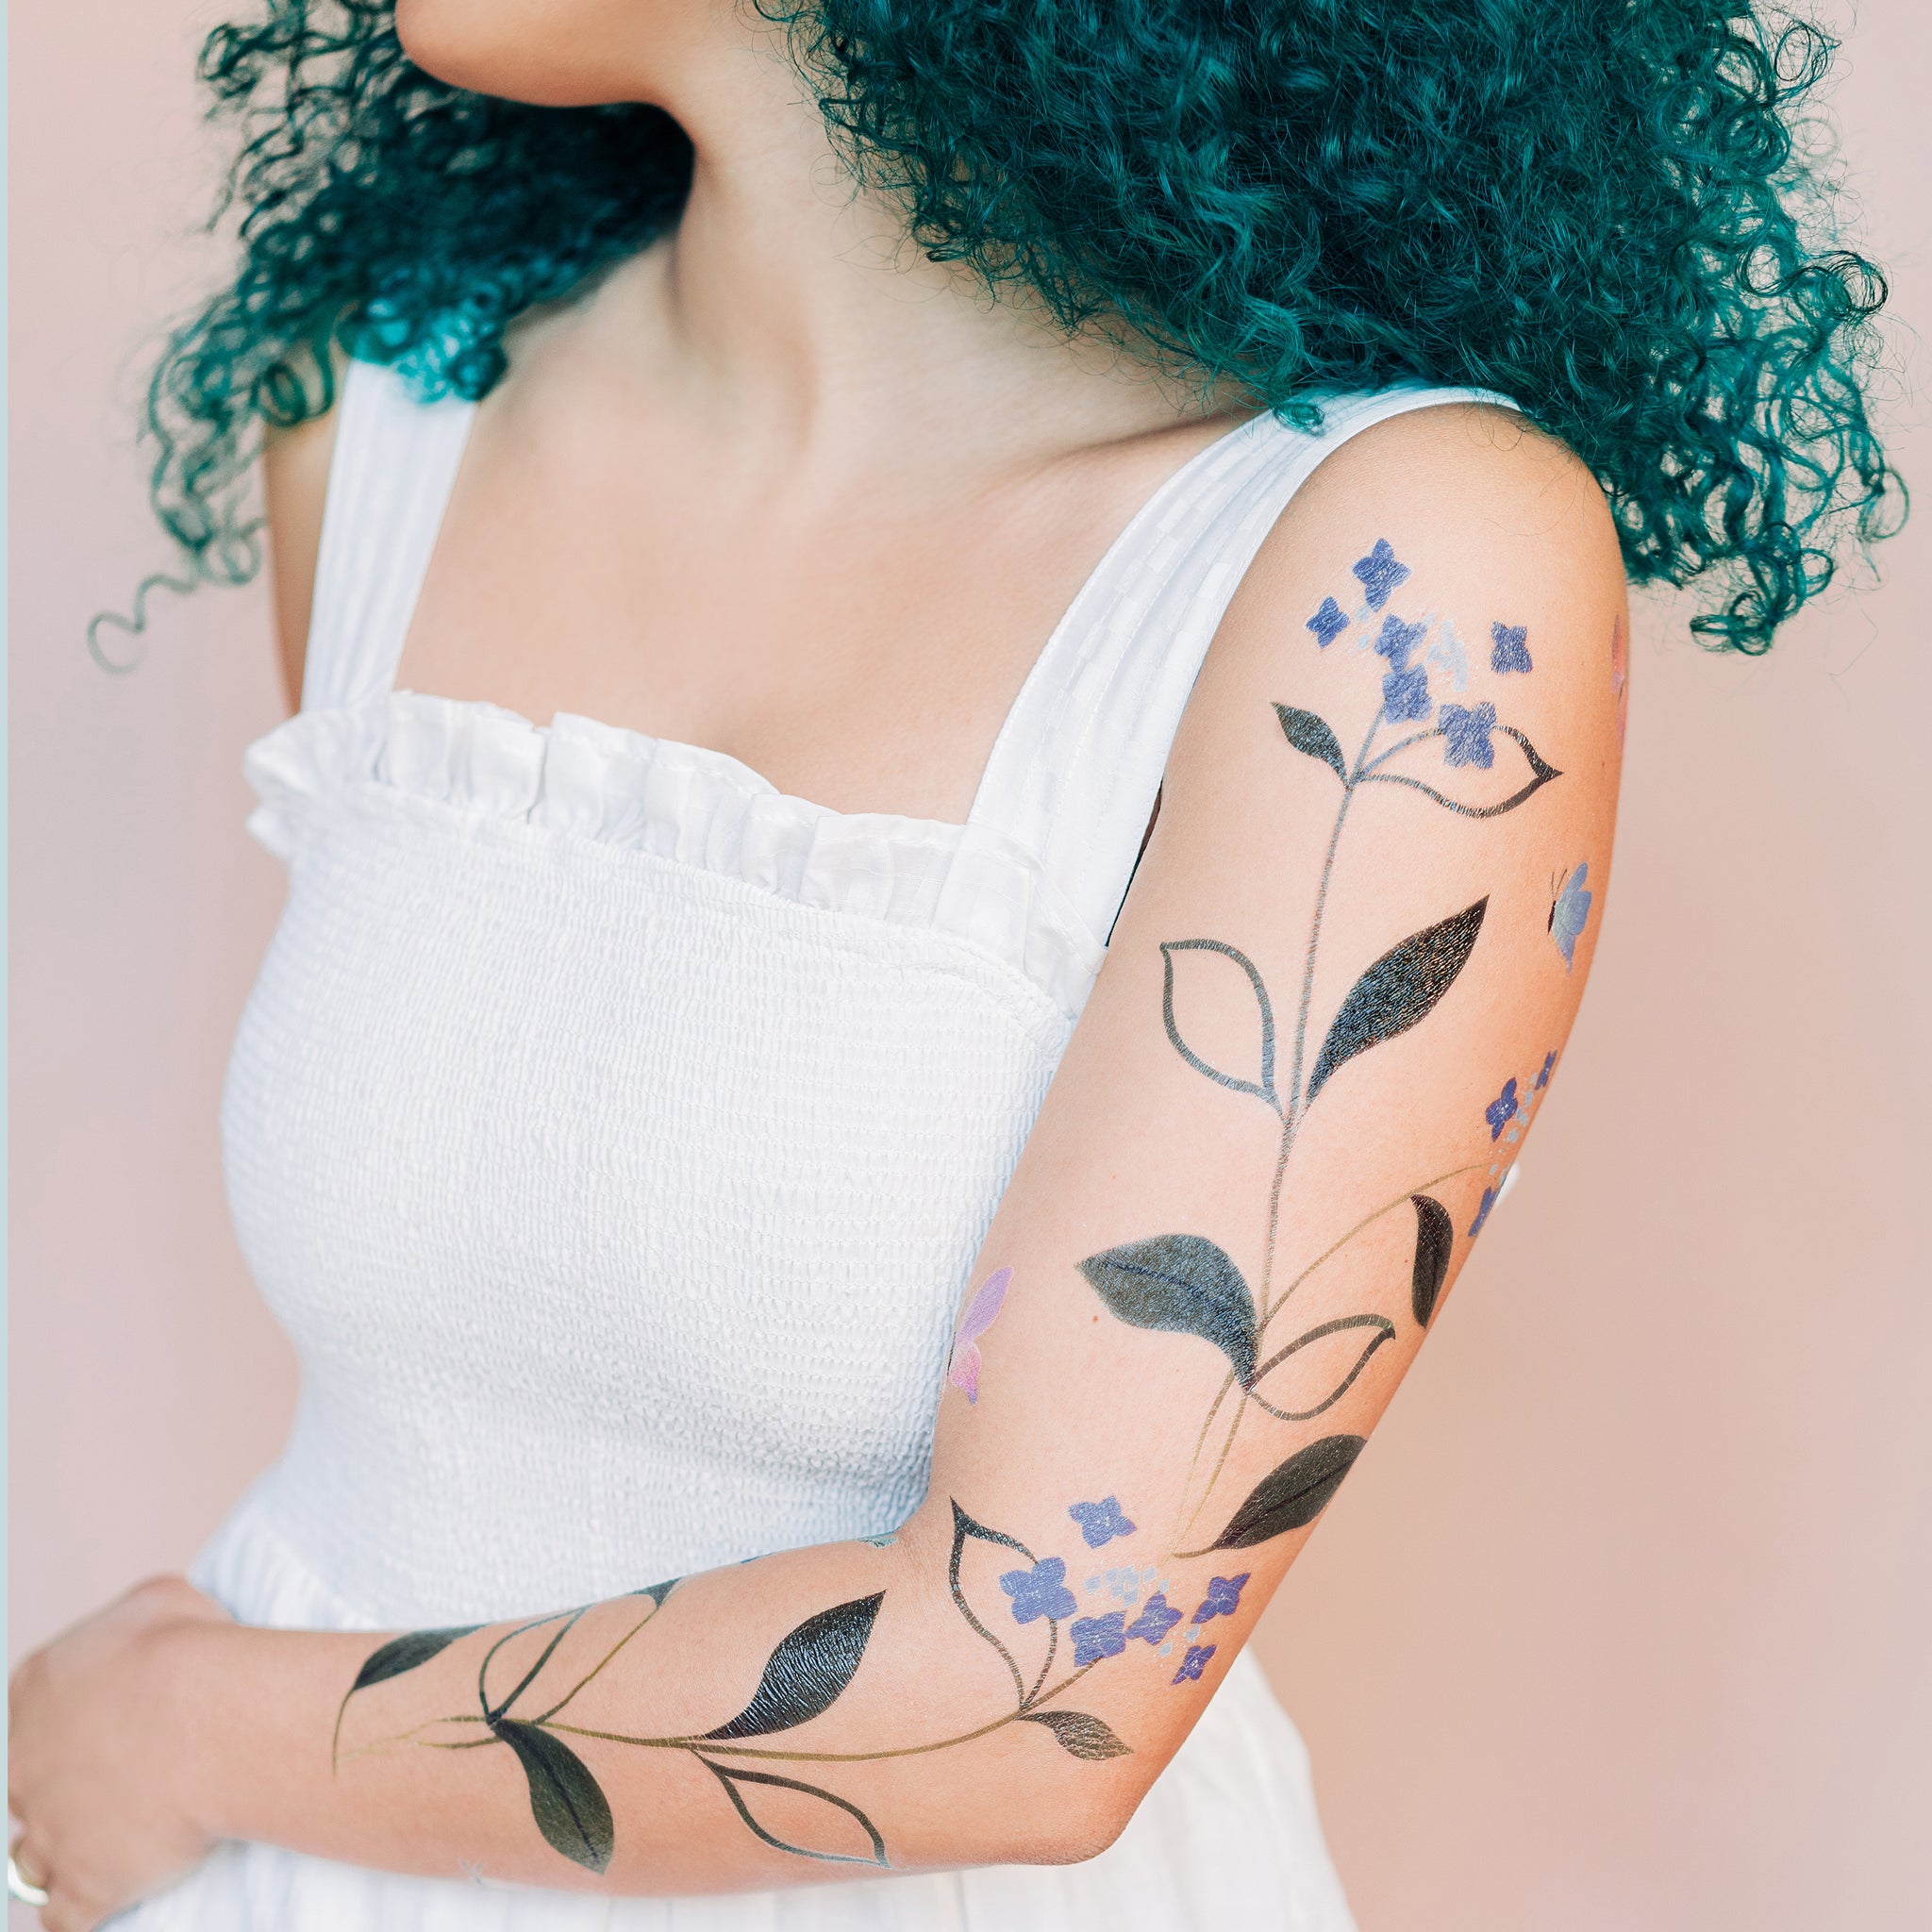 Flowering Vine Sleeve Kit by Jess Chen from Tattly Temporary Tattoos   Tattly Temporary Tattoos  Stickers